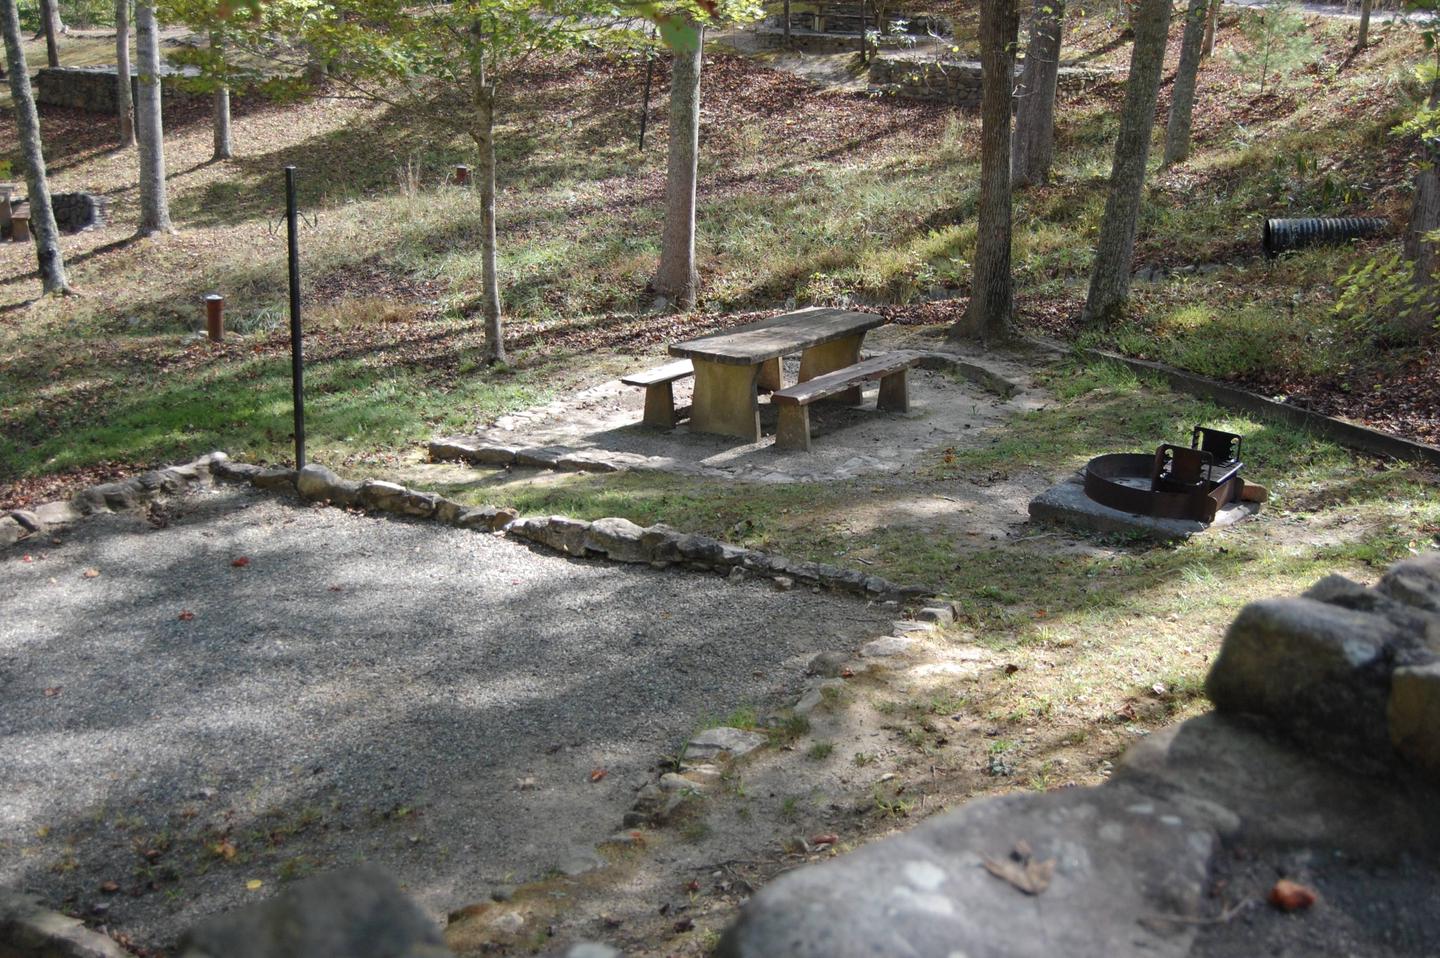 19 located in the interior of the campground loop, this site is nice and open and lays below the paved parking area. It is accessible with stone stairs. 